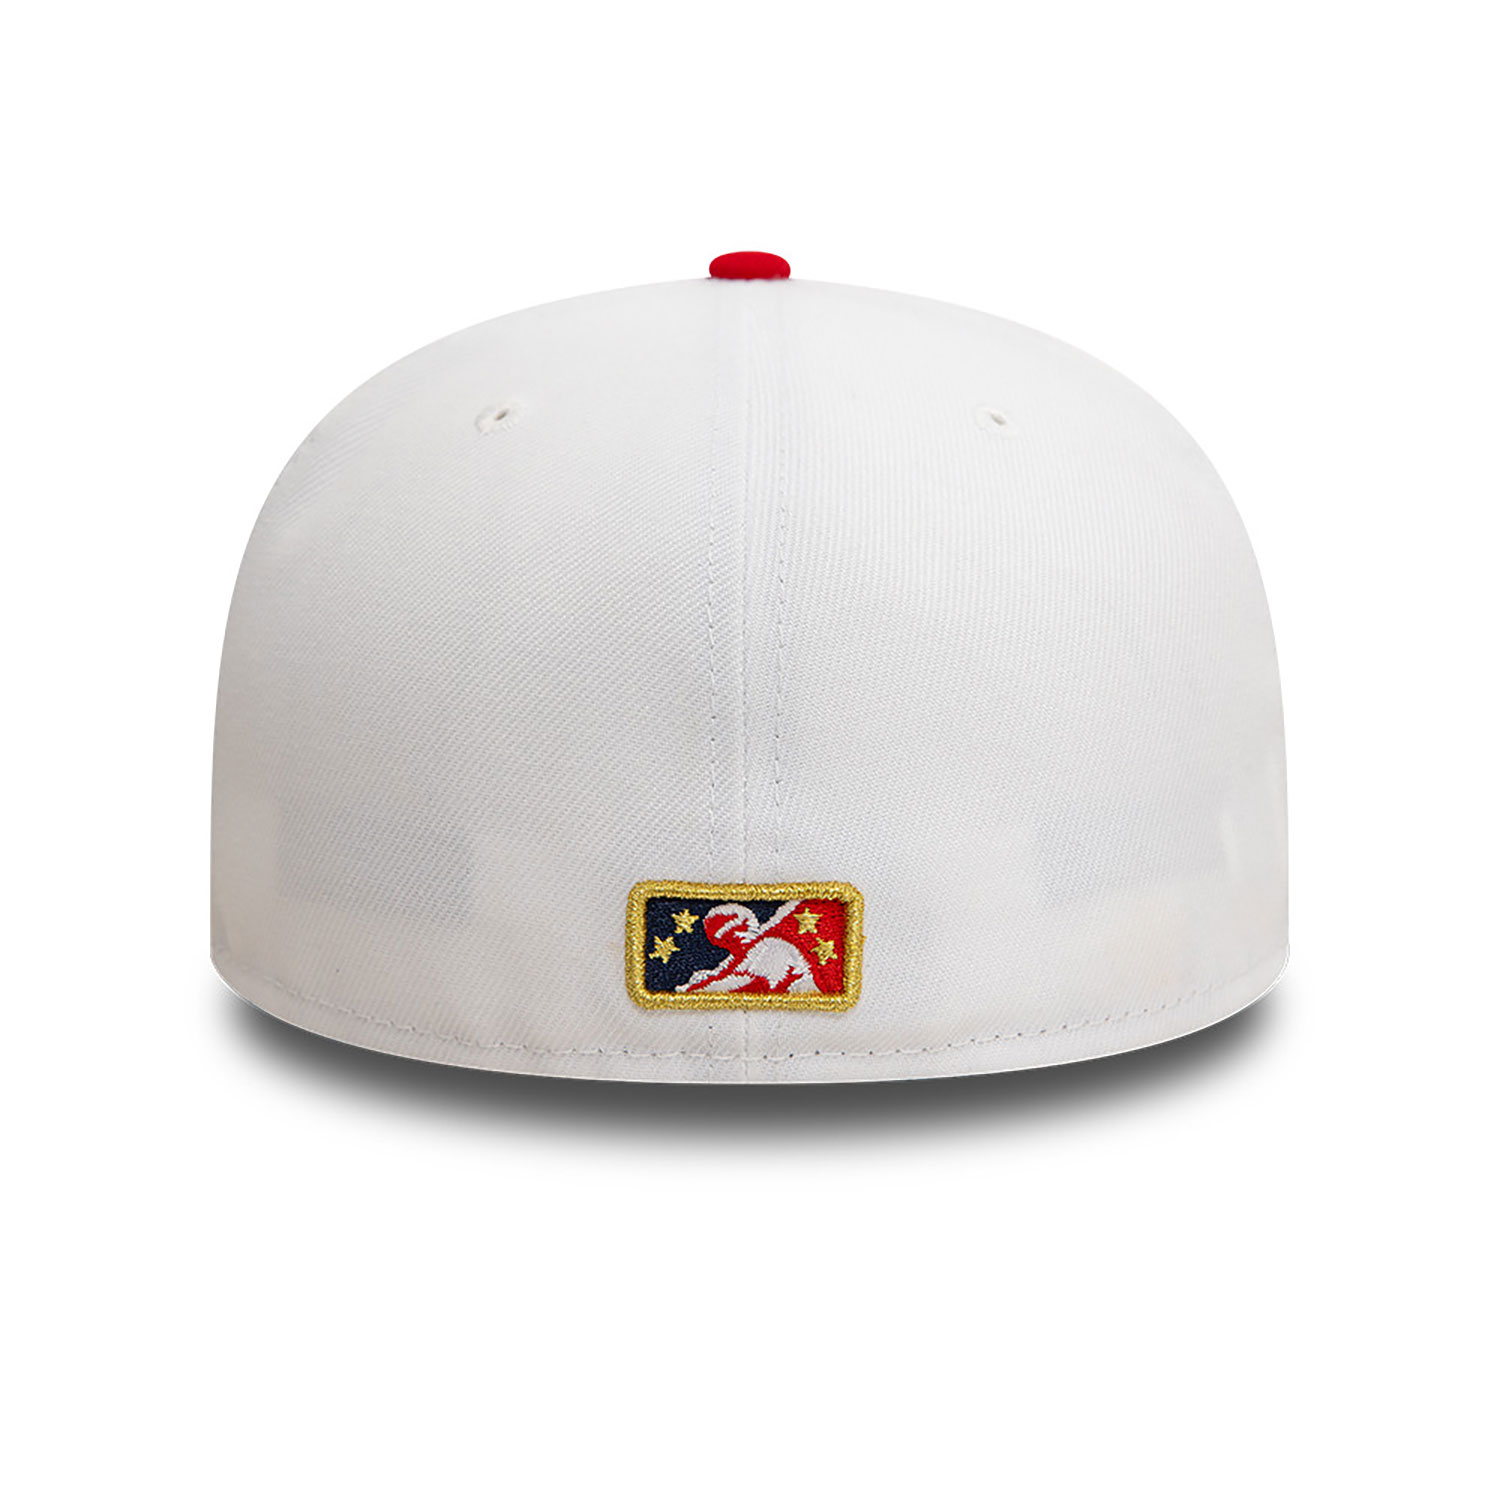 Kannapolis Cannon Ballers MiLB Ballers White 59FIFTY Fitted Cap